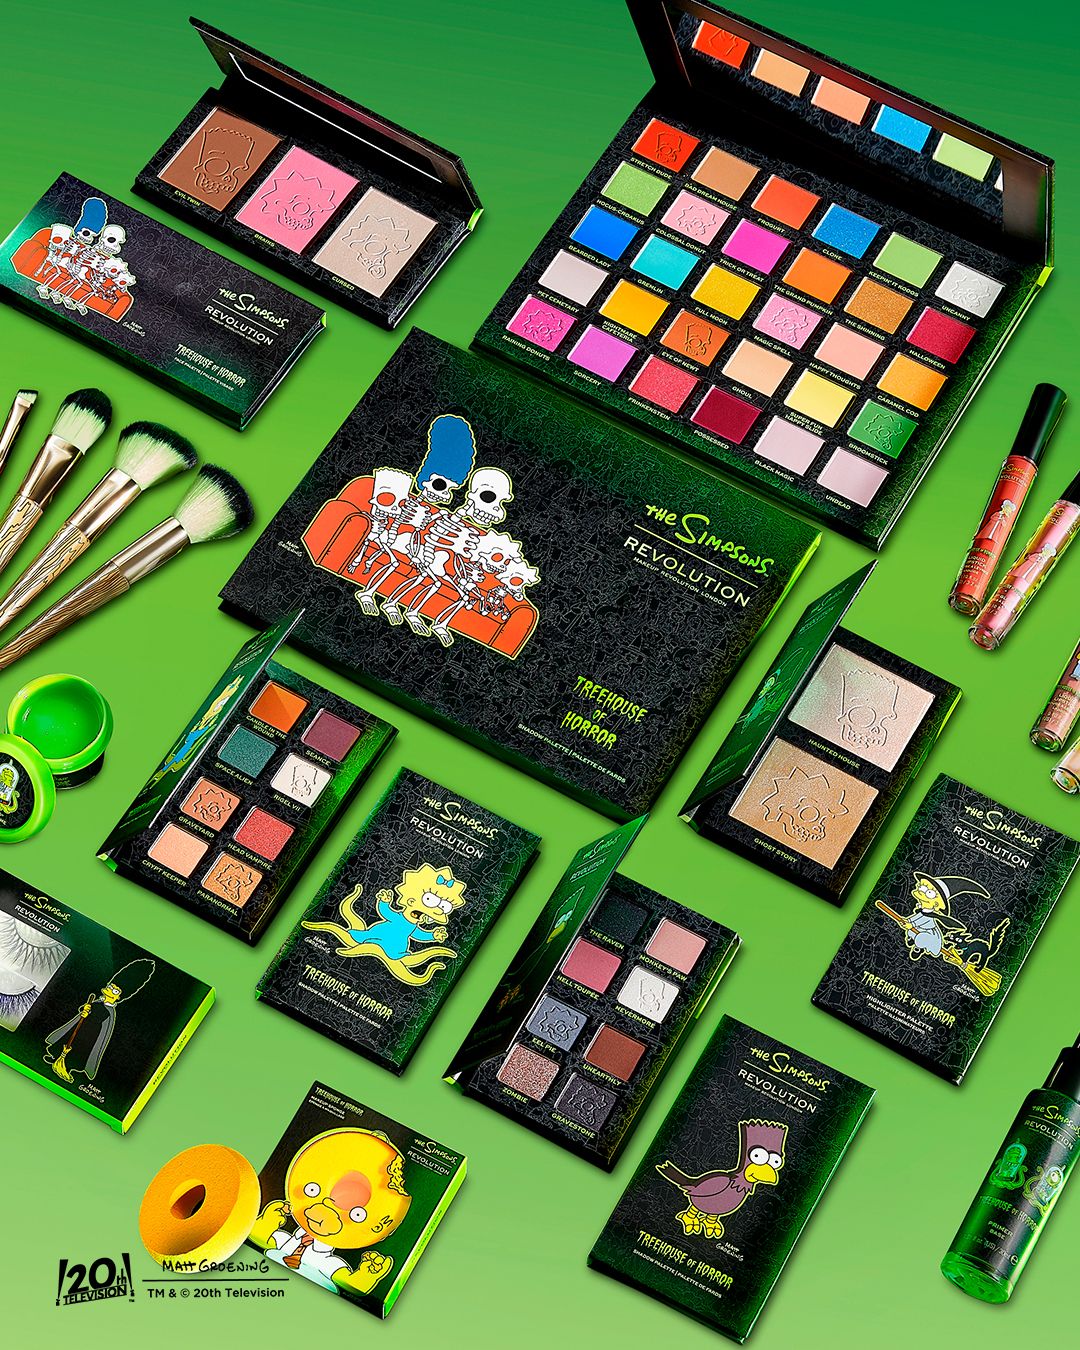 Revolution Beauty has released The Simpsons Treehouse of Horror Collection for Halloween.